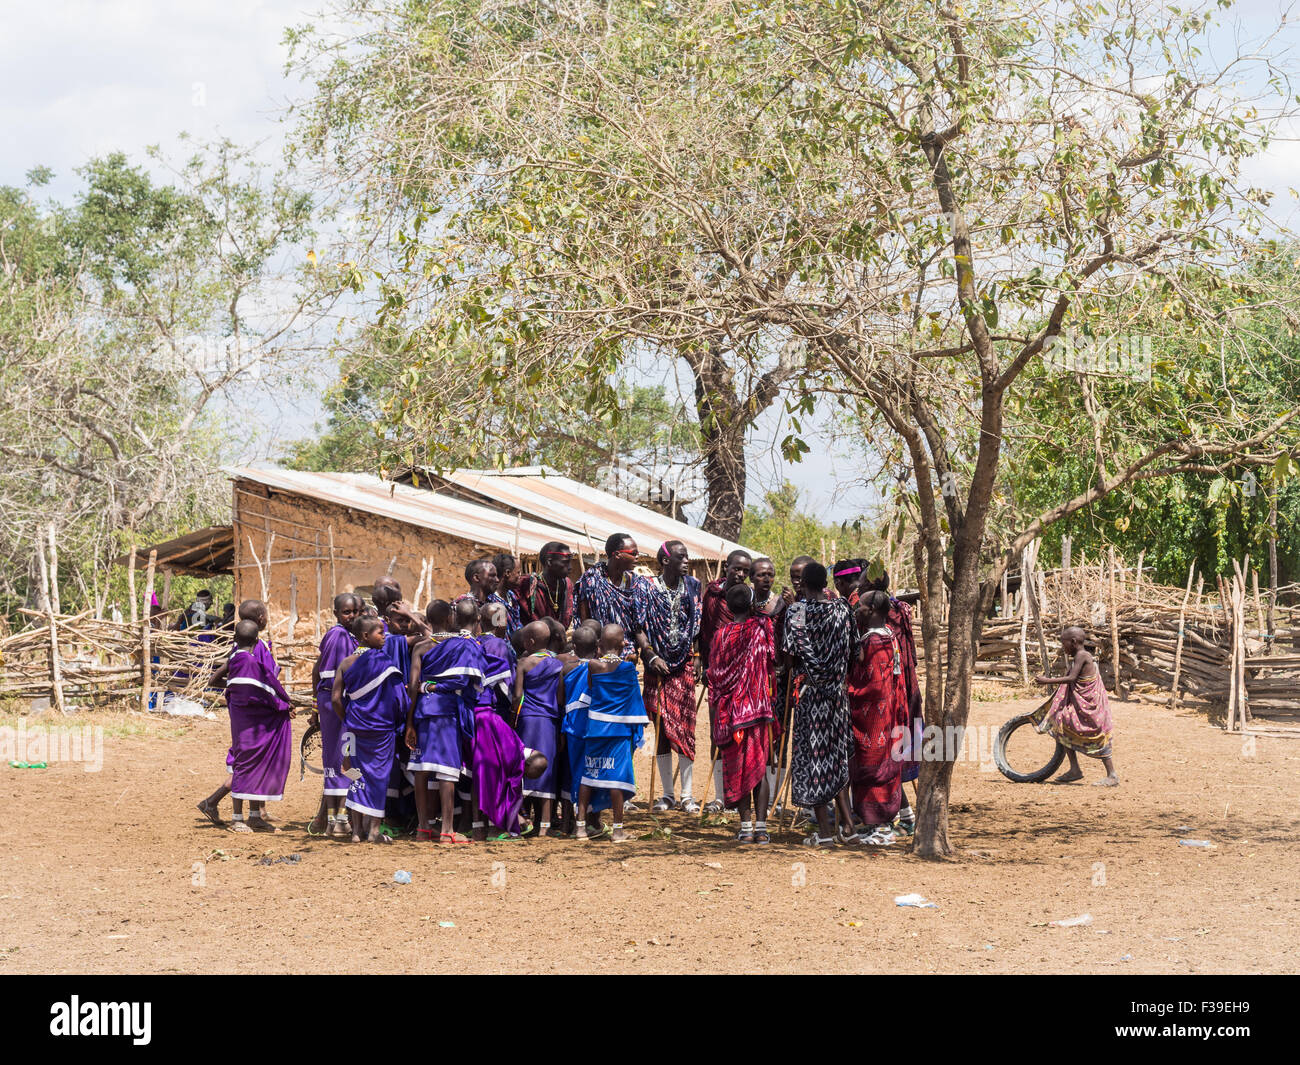 Maasai young man dancing and singing in a circle during the ceremony in a boma (Maasai village) Stock Photo